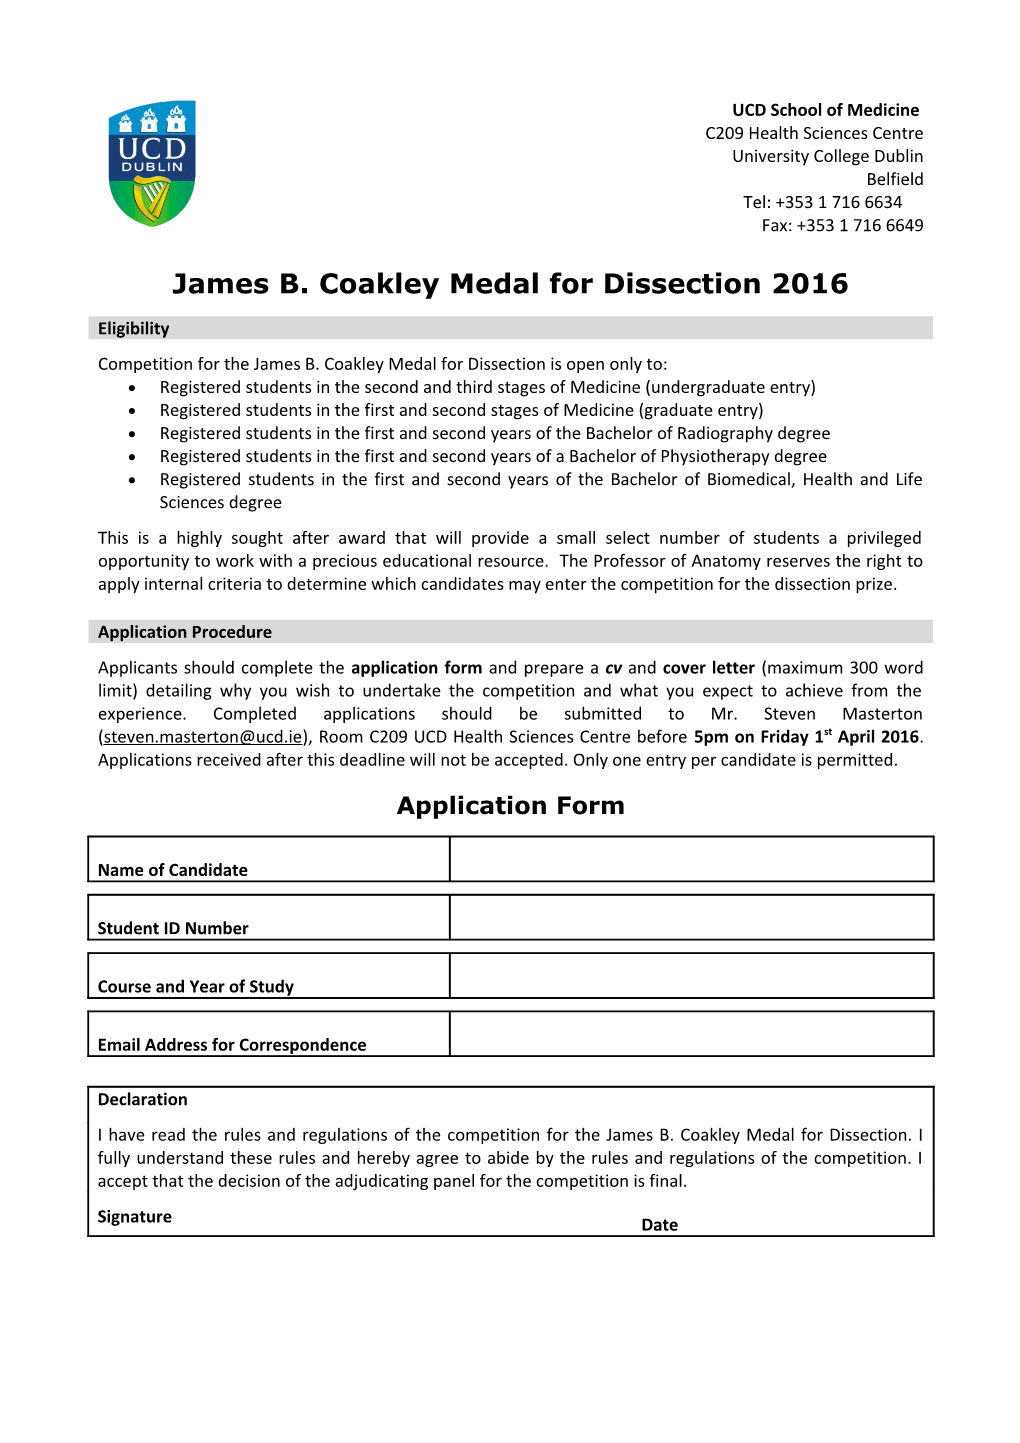 James B. Coakley Medal for Dissection 2016